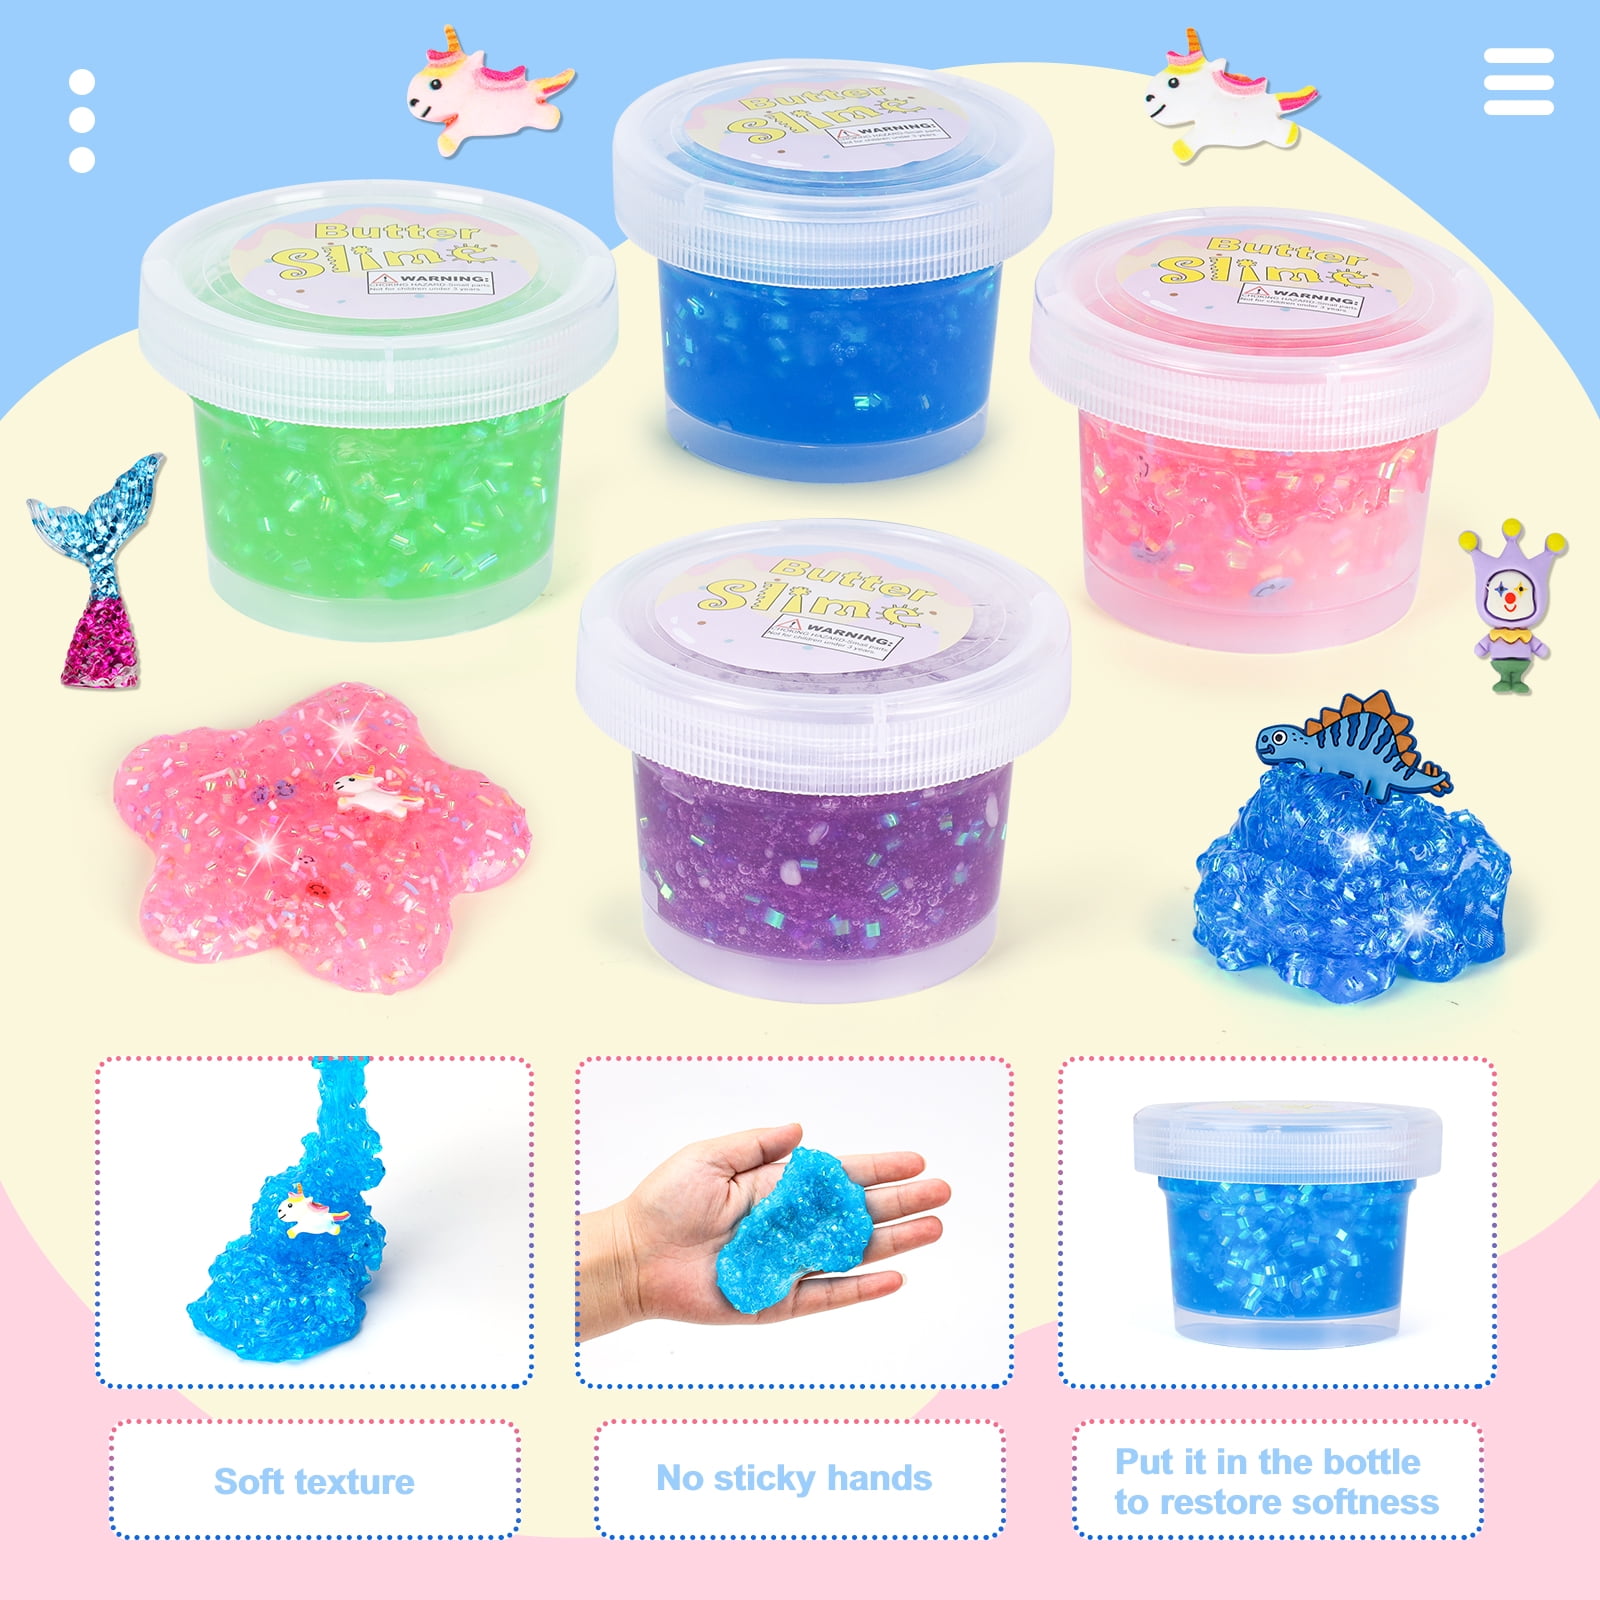 Boy Toys Crunchy Slime Making Kits for Girls Ages 8-12 Kid 6 7 8 9 10 Year  Old Girl Gifts: Kids Birthday Presents for 5-11 Year Old Girls Party Favors  Jelly DIY